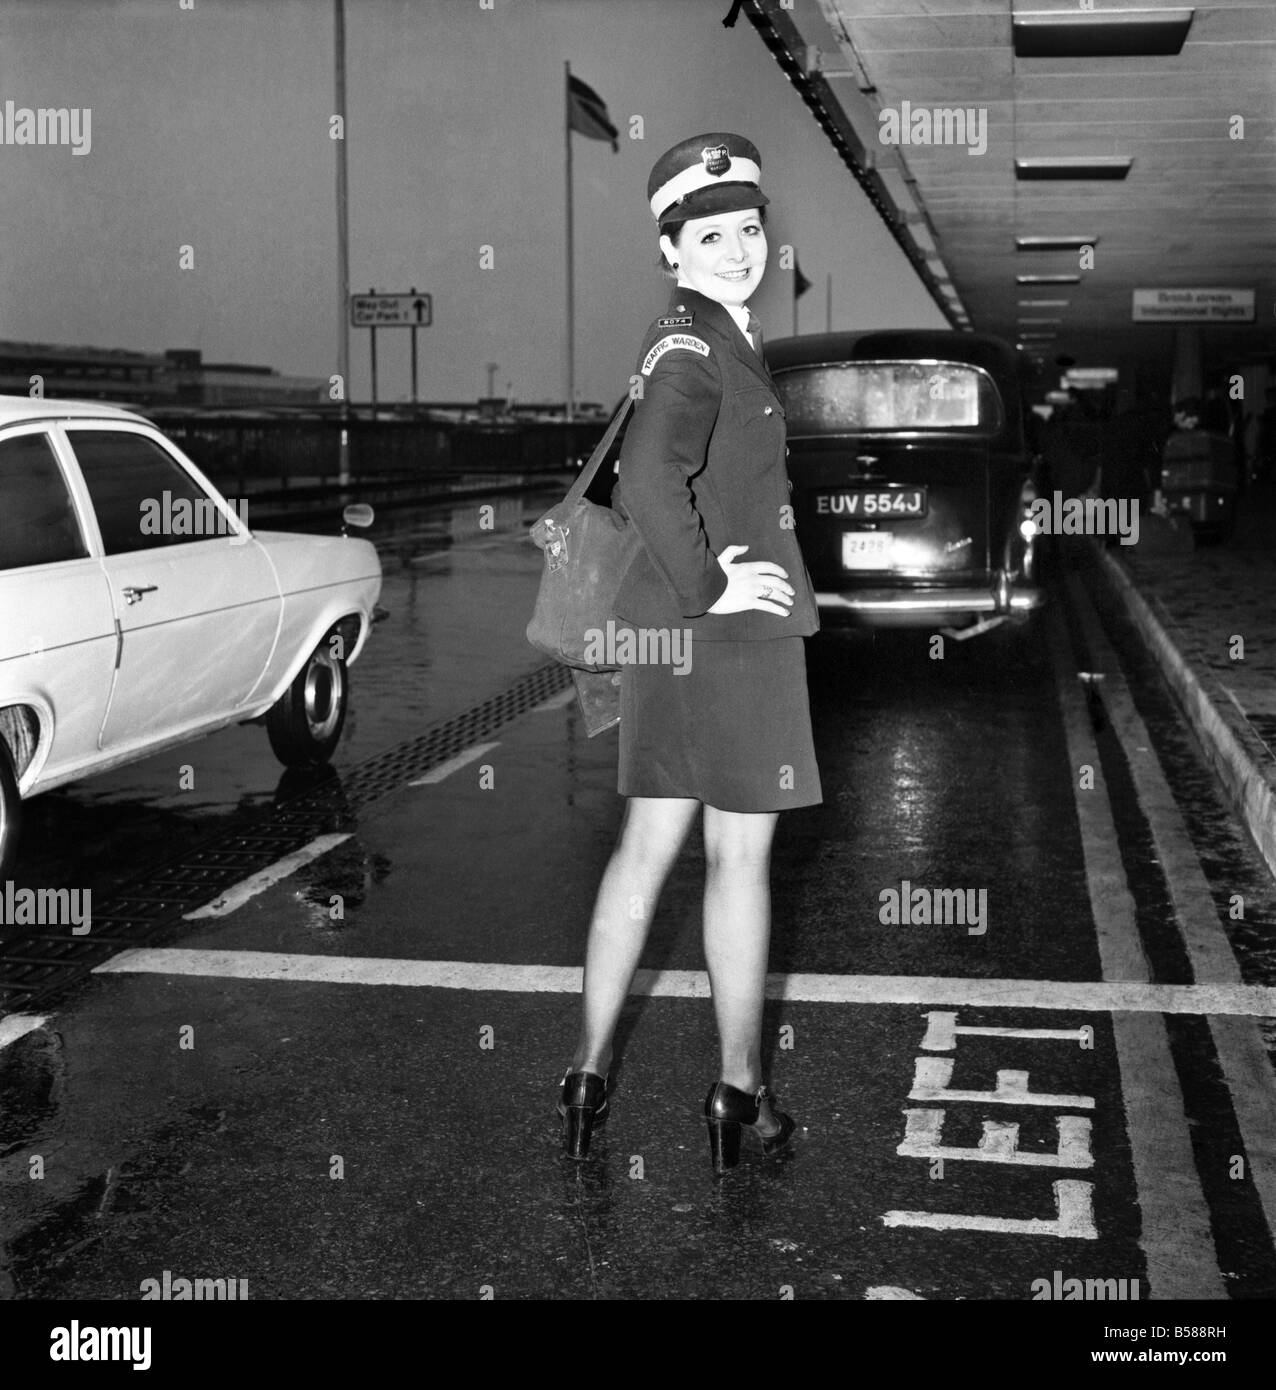 Beauty Queen Traffic Wardens. Travellers St London's Heathrow Airport may have their parking problems eased with cover girl smiles from two ex-model Traffic Wardens. Miss Denise Humphreys and Mrs. Linda Morton, Former beauty queens and models, have been stationed at the Airport since last Autumn. January 1975 75-00661-004 Stock Photo